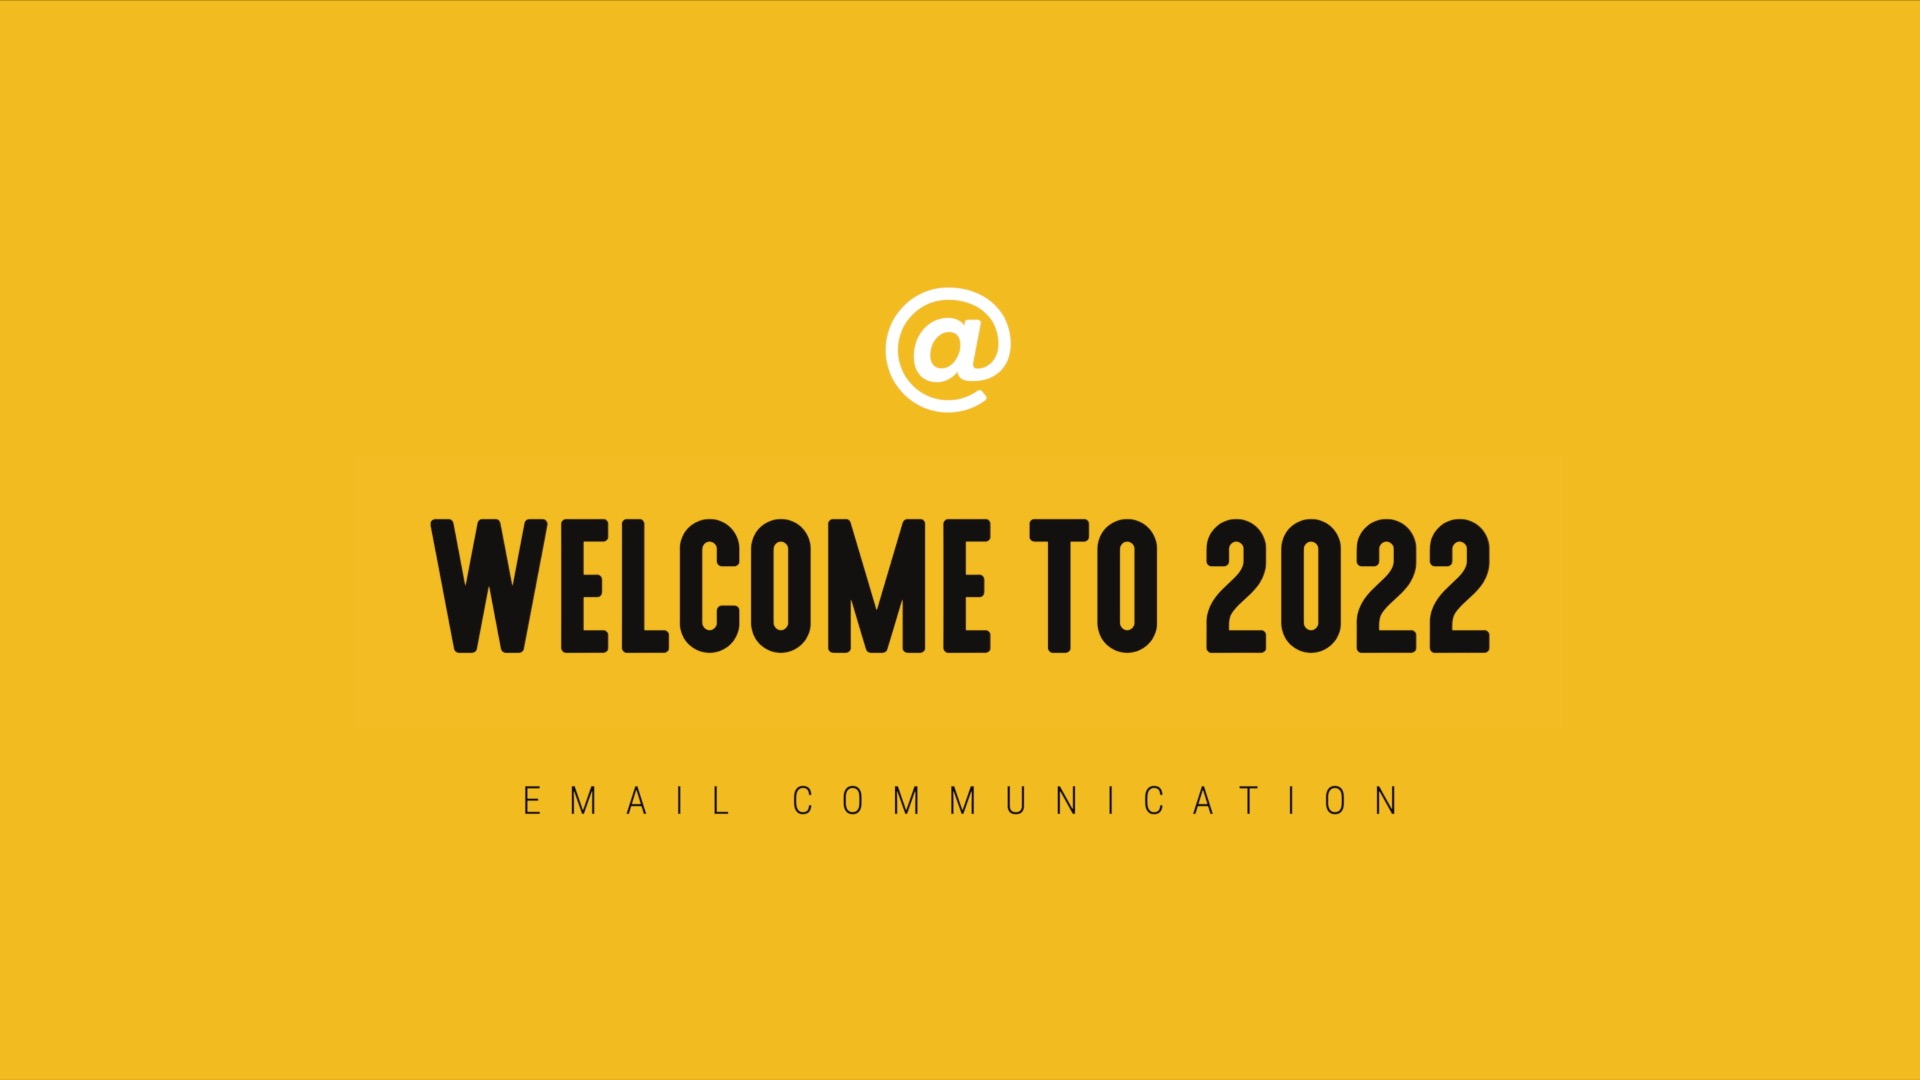 [NEW] Single-Topic Email | Welcome to 2022